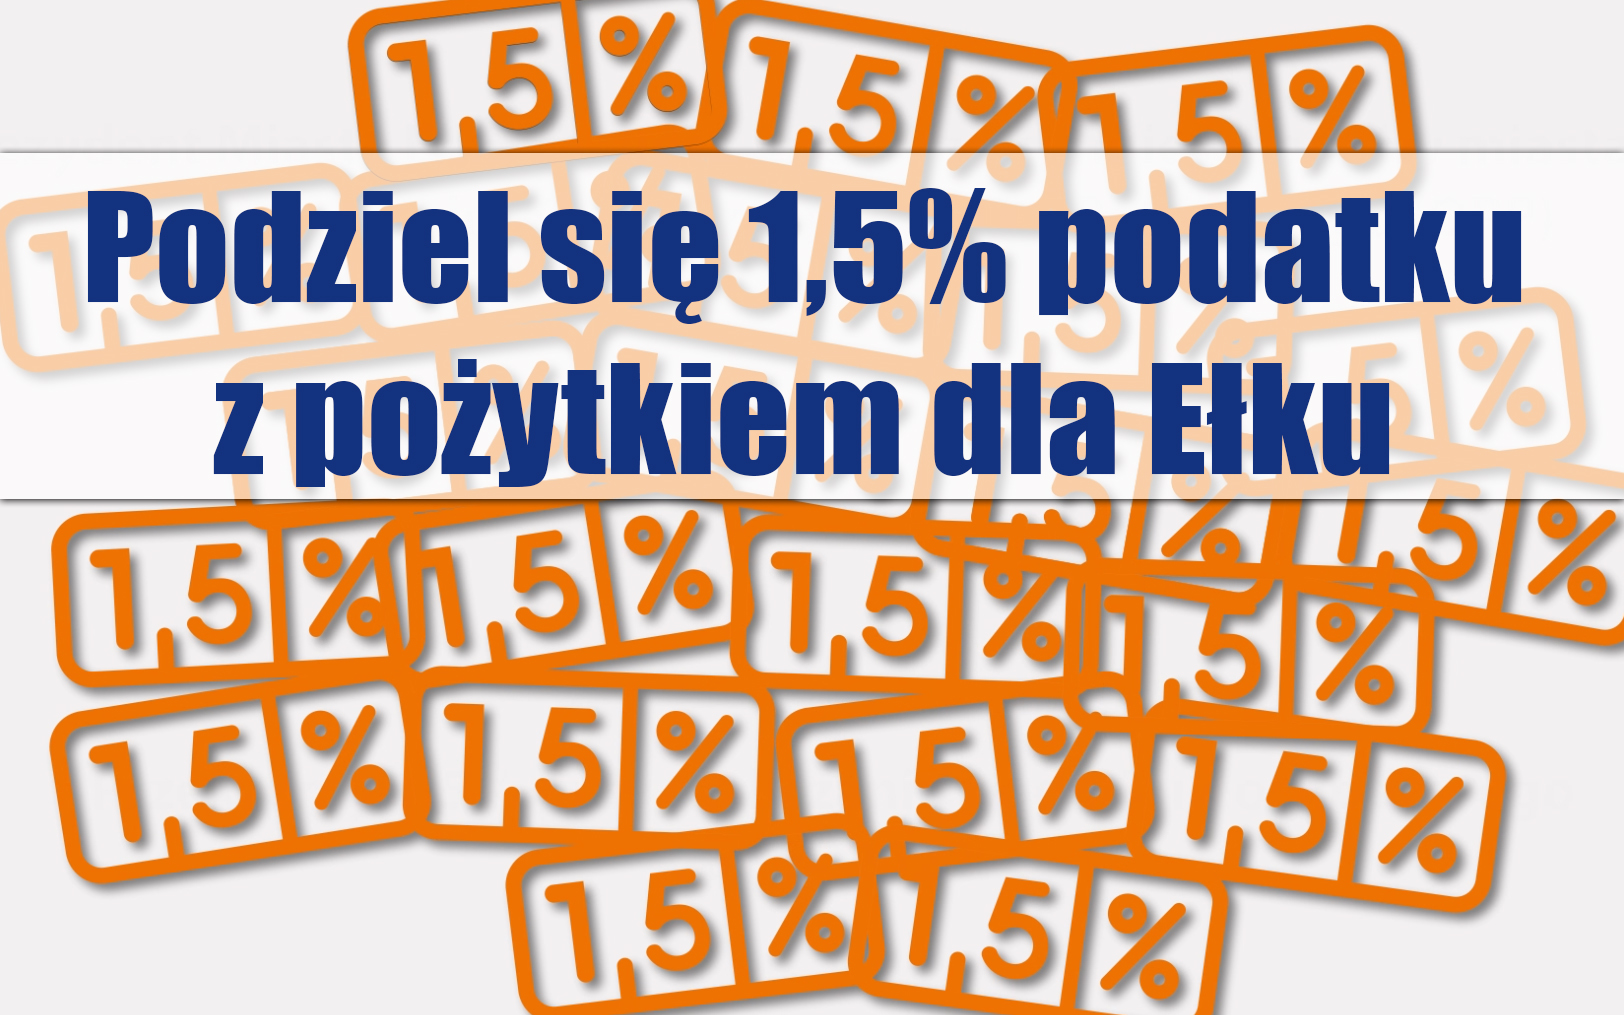 Share 1.5% tax for the benefit of Elk